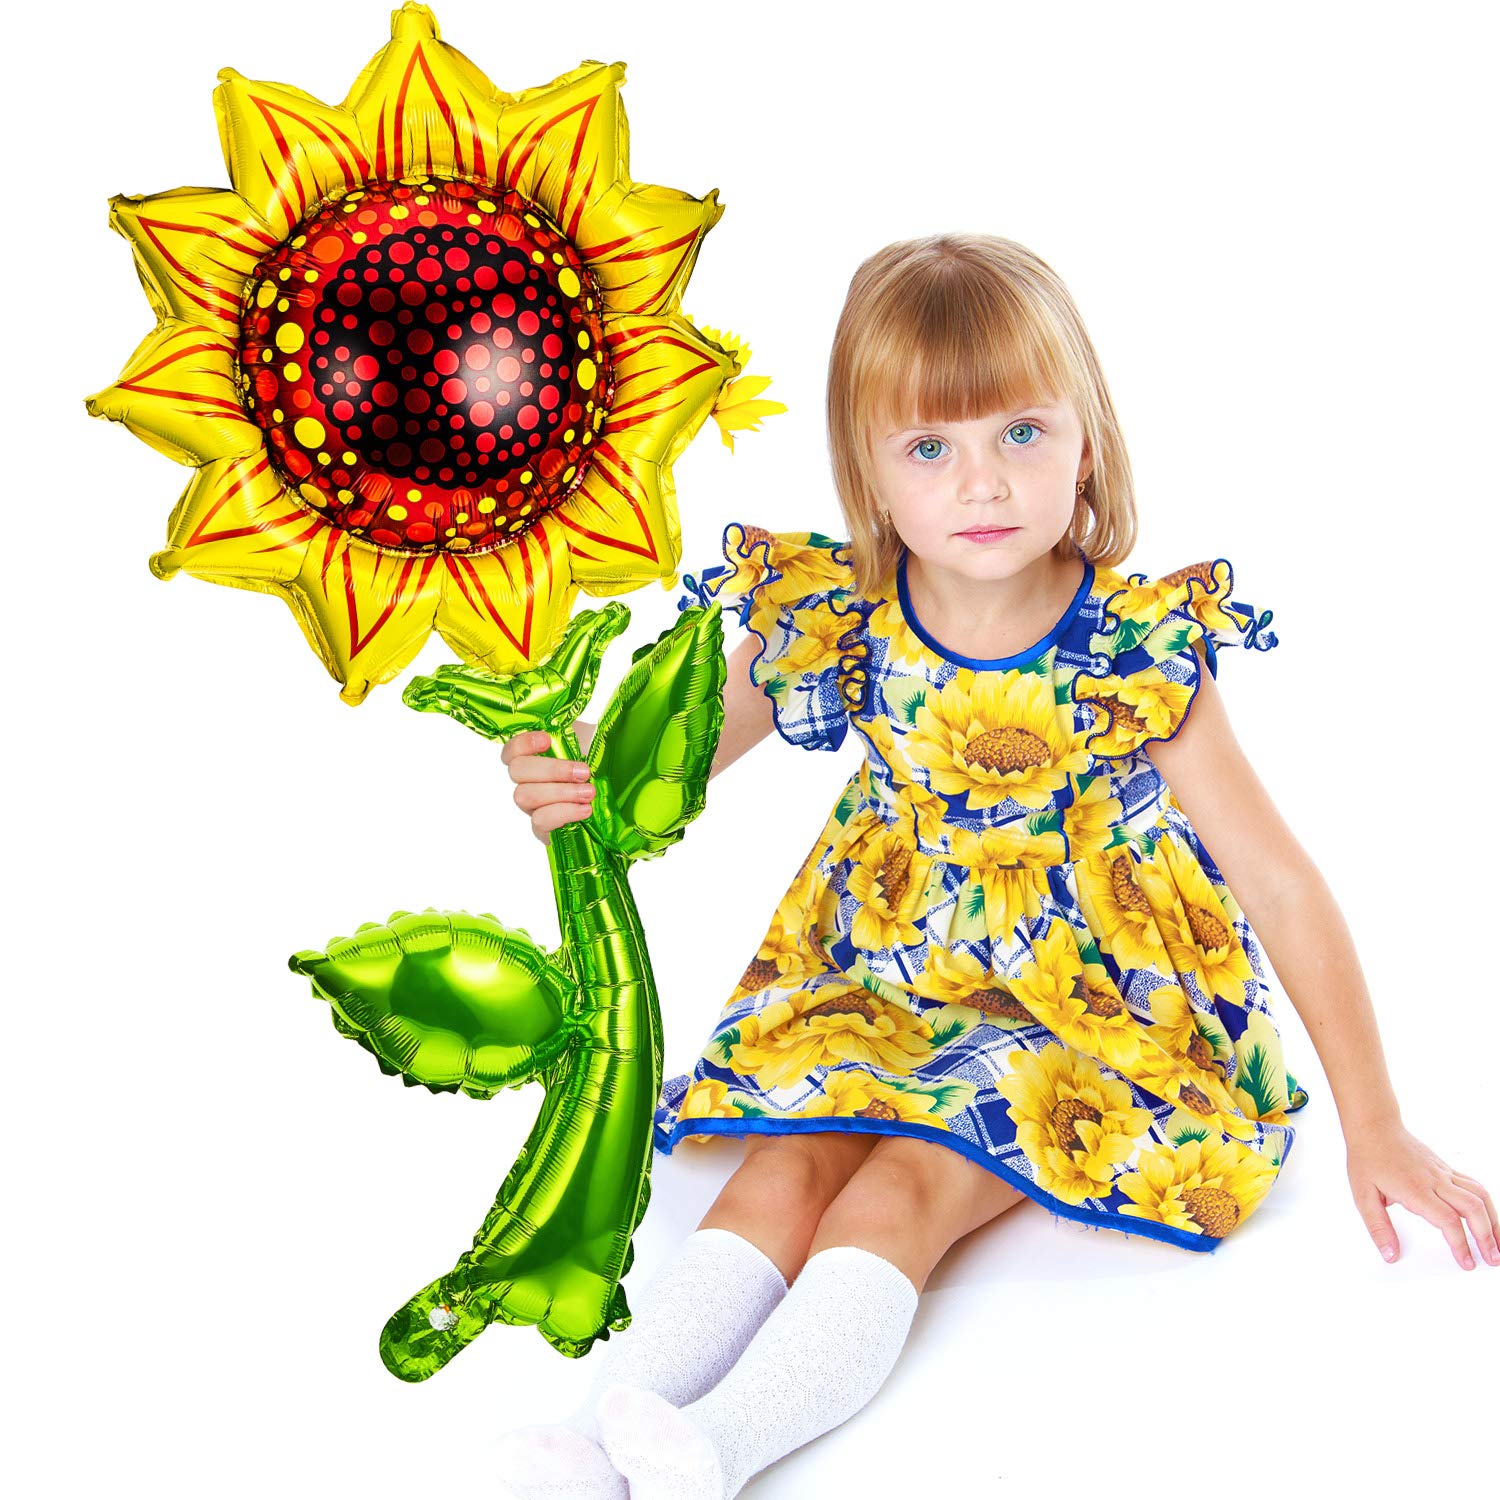 6 Pieces 36 Inch Sunflower Balloons Sunflower Birthday Party Decorations Supplies Yellow Aluminum Foil Balloon Garland for Summer Sunflower Theme Party Wedding Baby Shower Decor